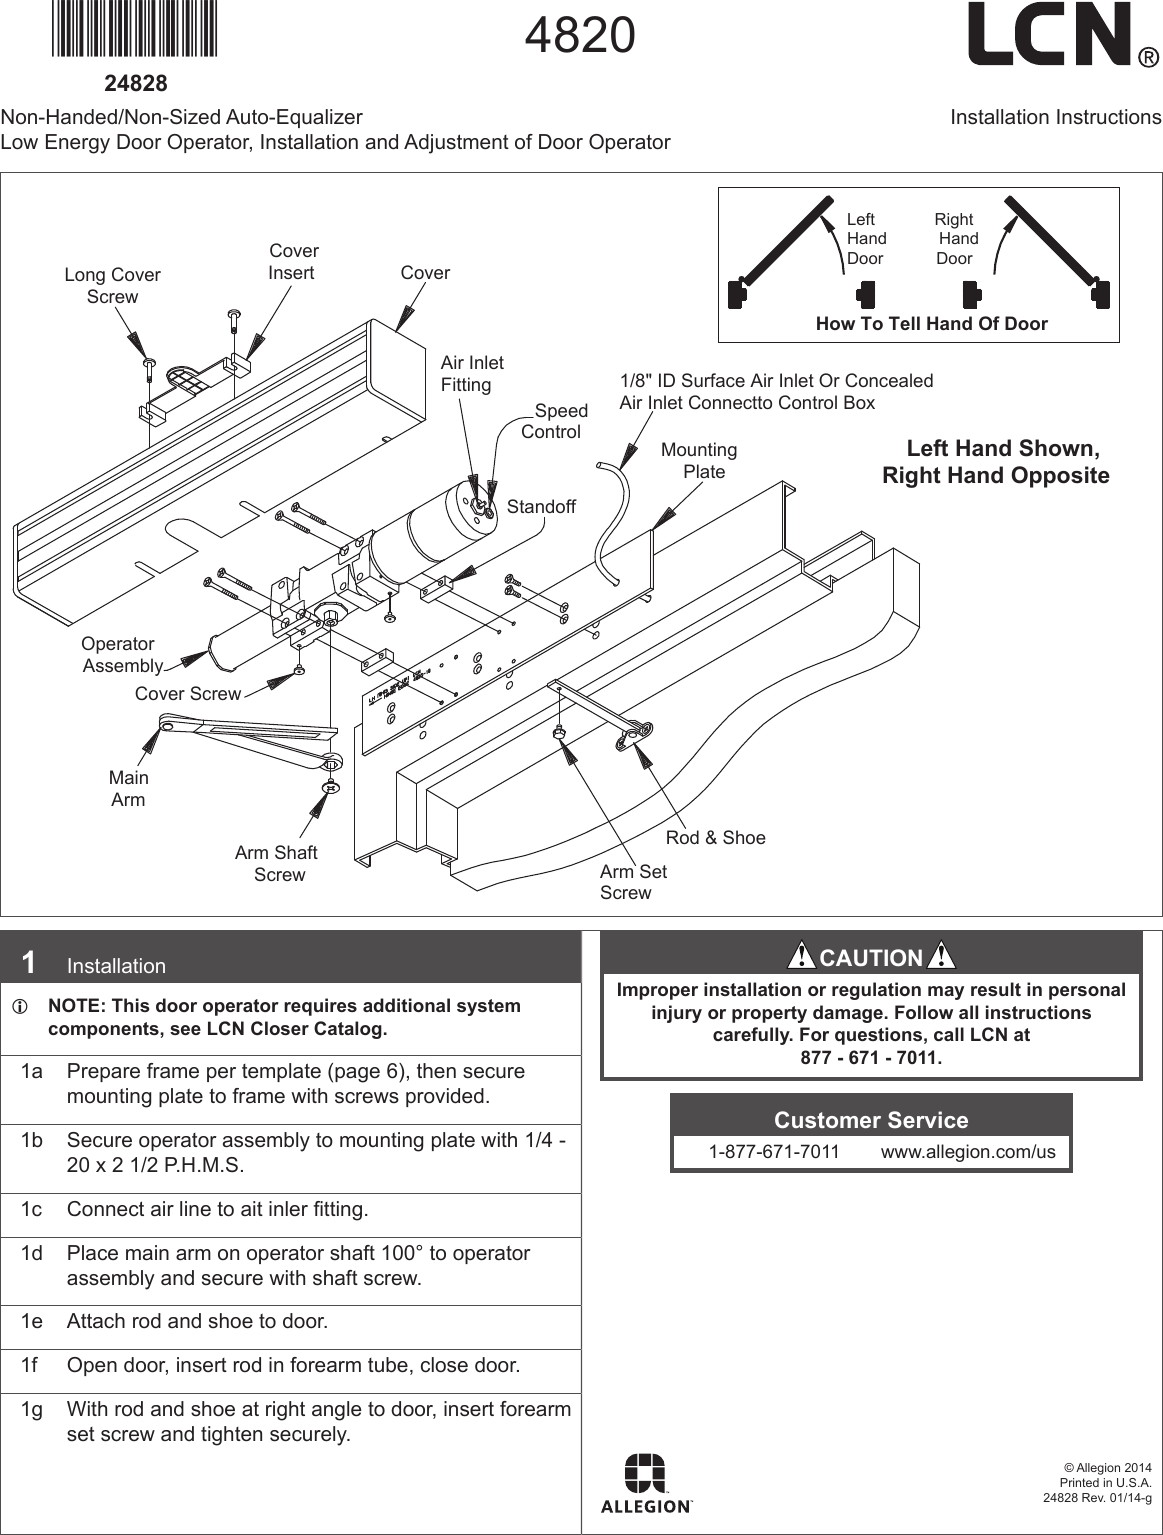 Page 1 of 7 - LCN  4820 Series Installation Guide LCN4820installationguide